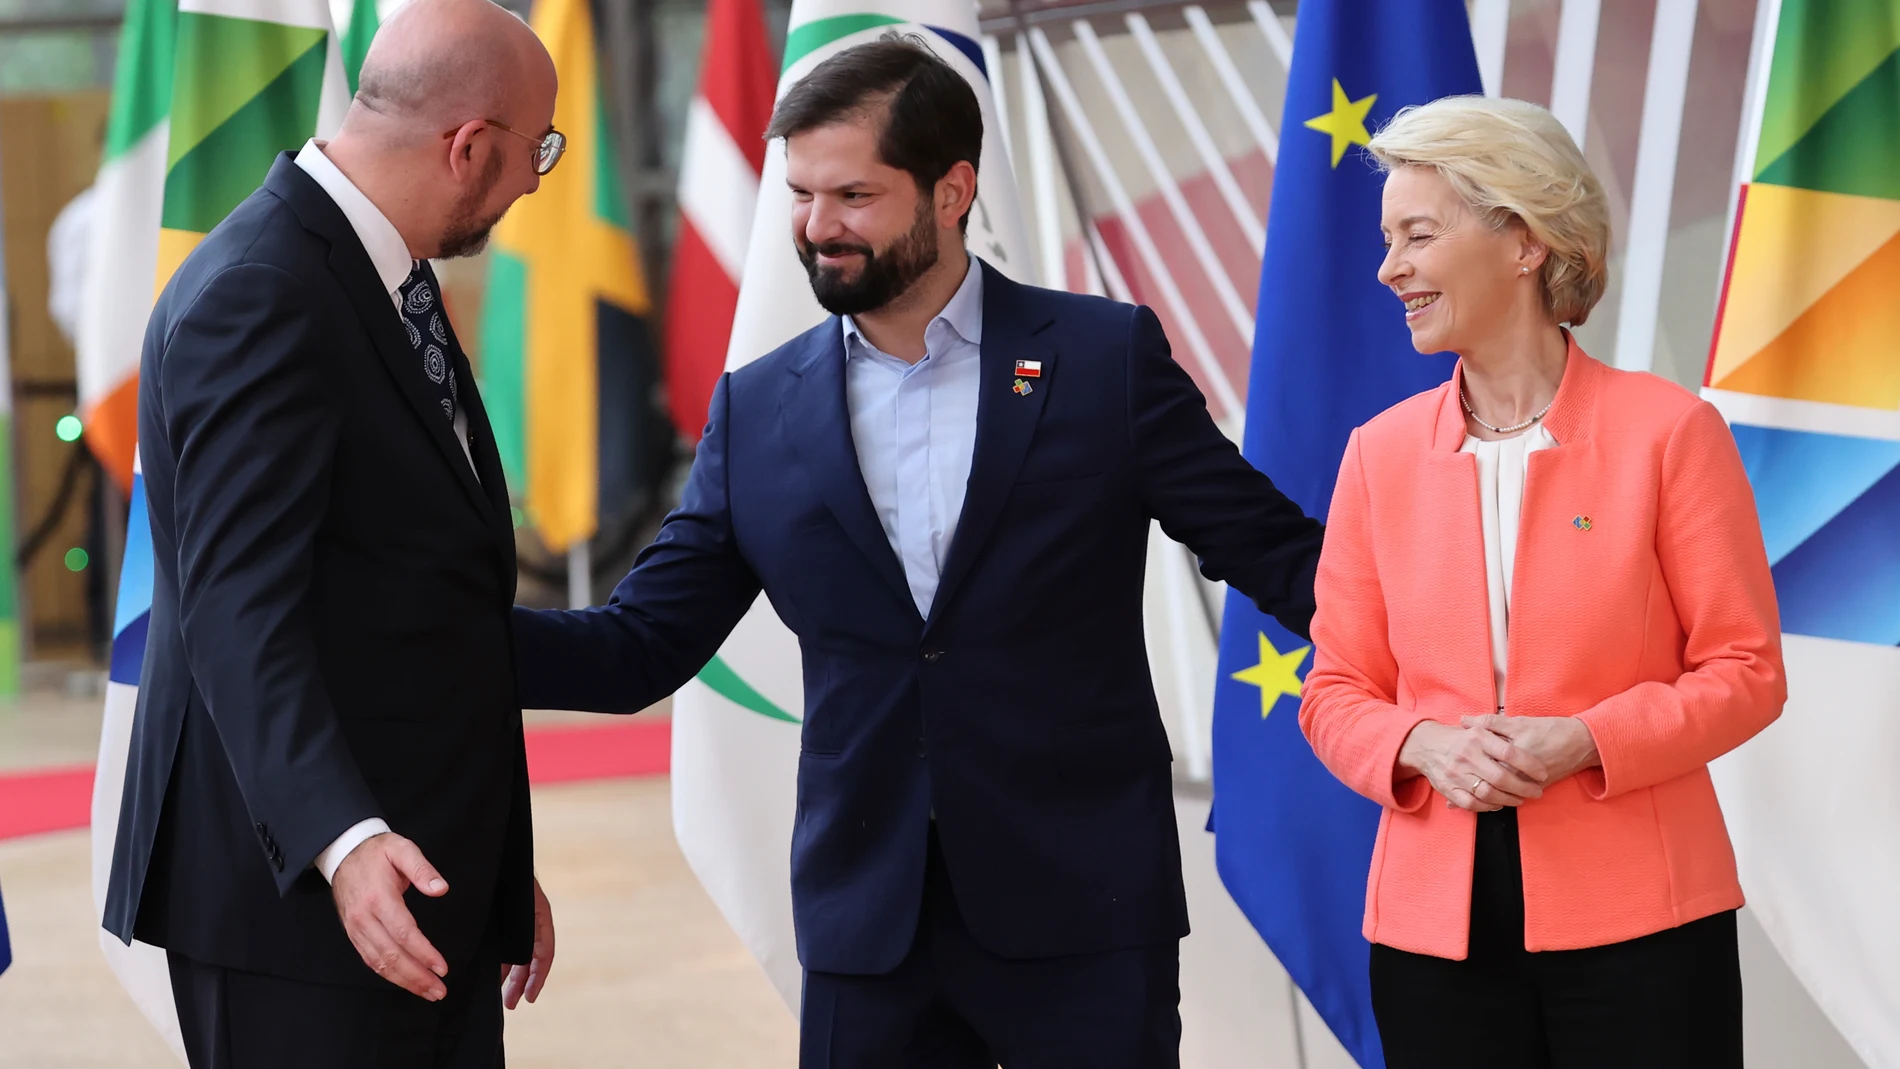 European Council President Charles Michel, left, and European Commission President Ursula von der Leyen, right, welcome Chile's President Gabriel Boric to a round table meeting at the third EU-CELAC summit that brings together leaders of the EU and the Community of Latin American and Caribbean States in Brussels, Belgium, Monday, July 17, 2023. (AP Photo/Francois Walschaerts)